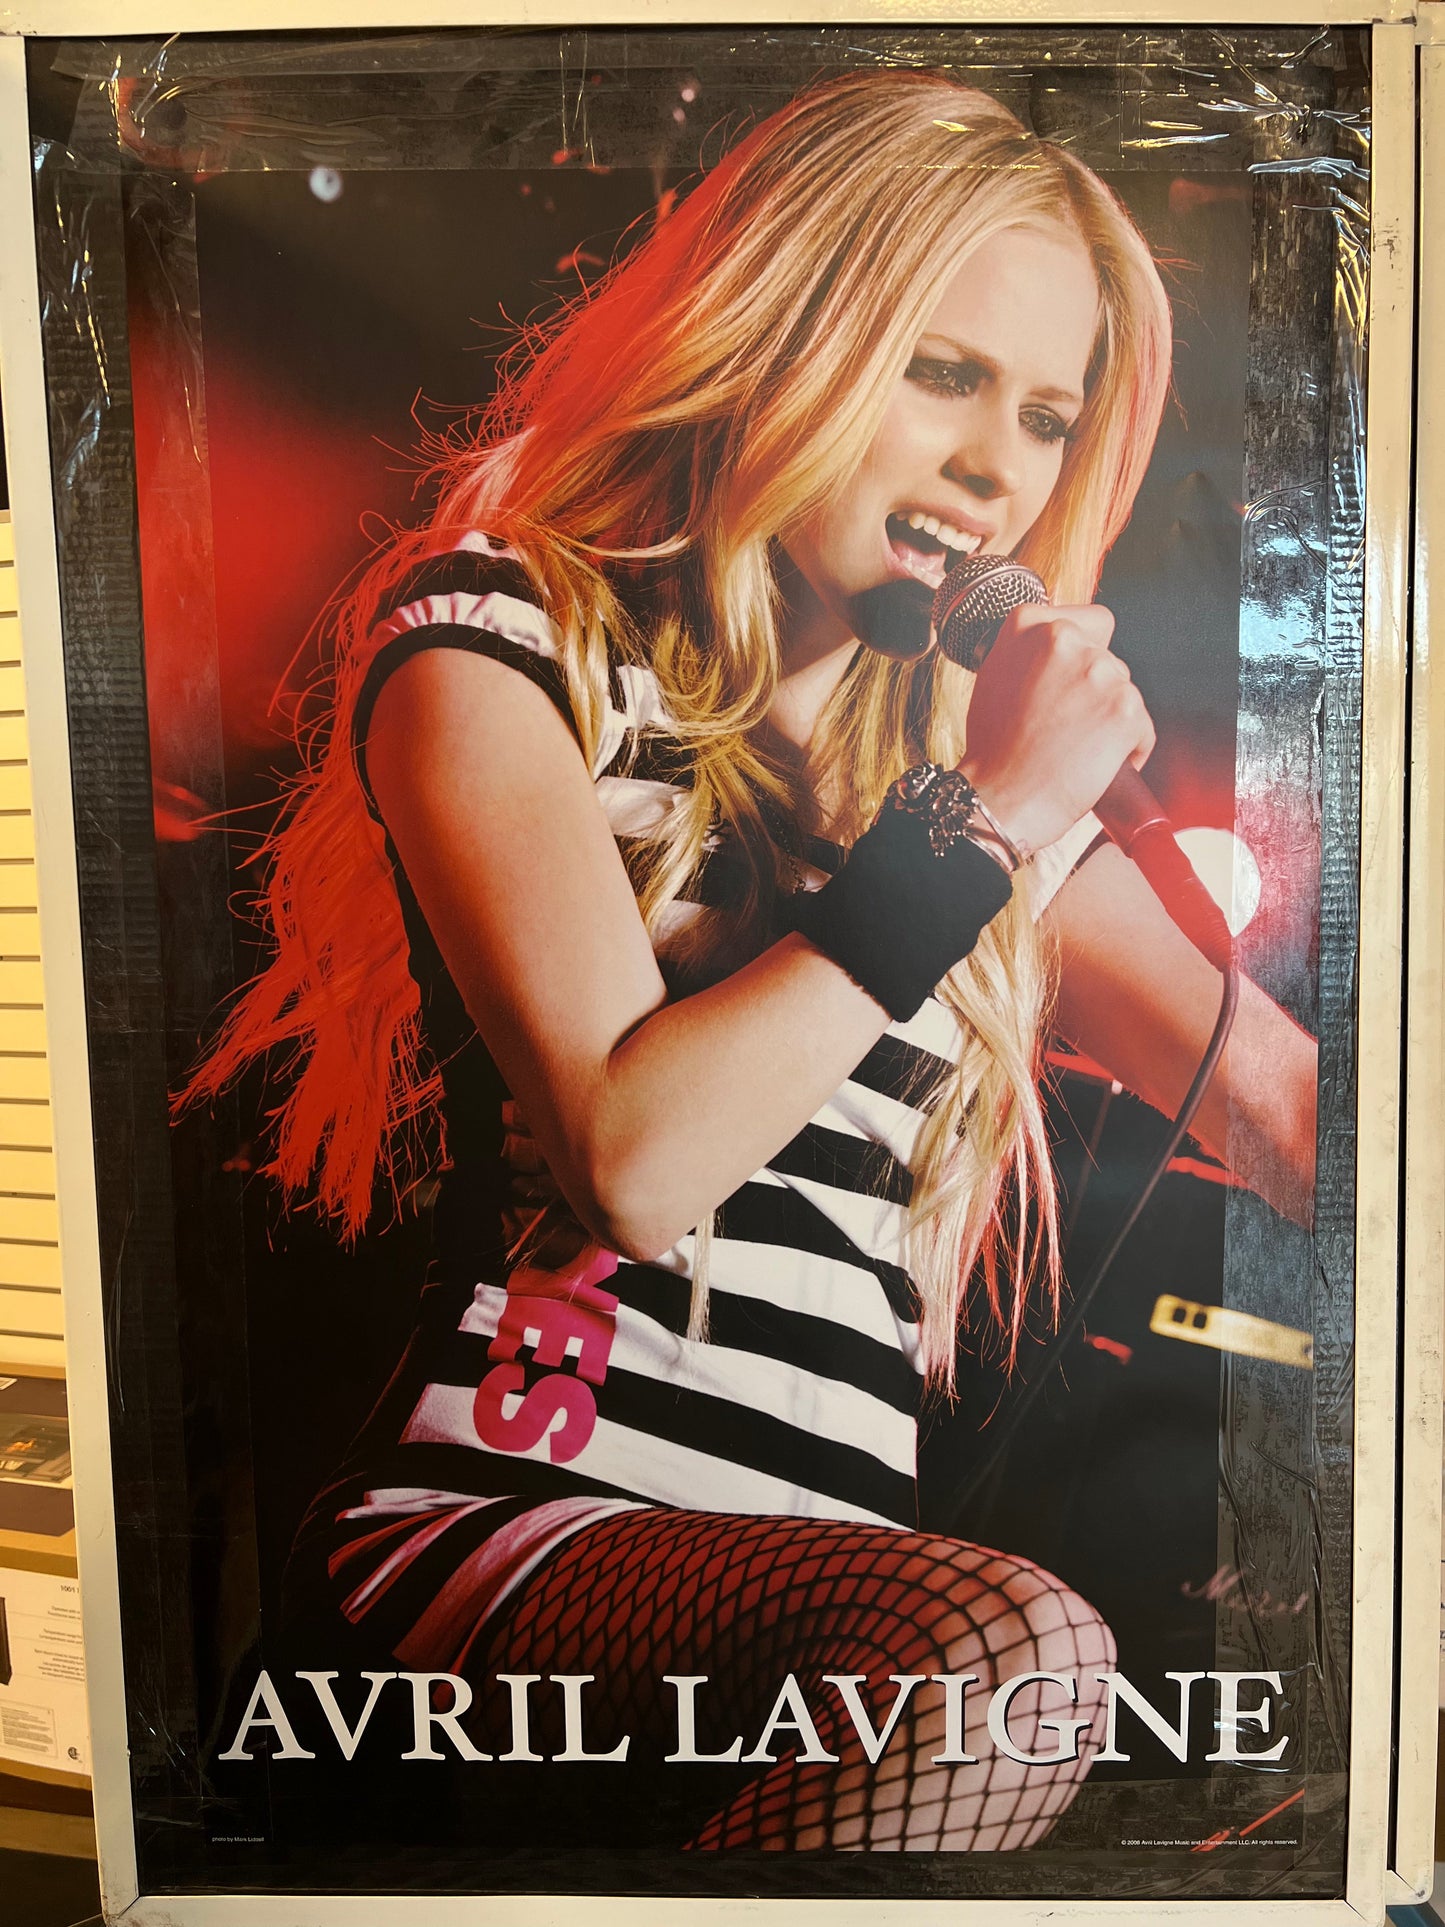 limited edition 24x36 inch vintage Avril Lavigne poster featuring the iconic image of Avril performing on stage, wearing a black and white striped mini dress, fishnet stockings, and holding a Shure microphone. The poster is printed in mint condition and will never be printed again, making it a rare and valuable piece of music history.